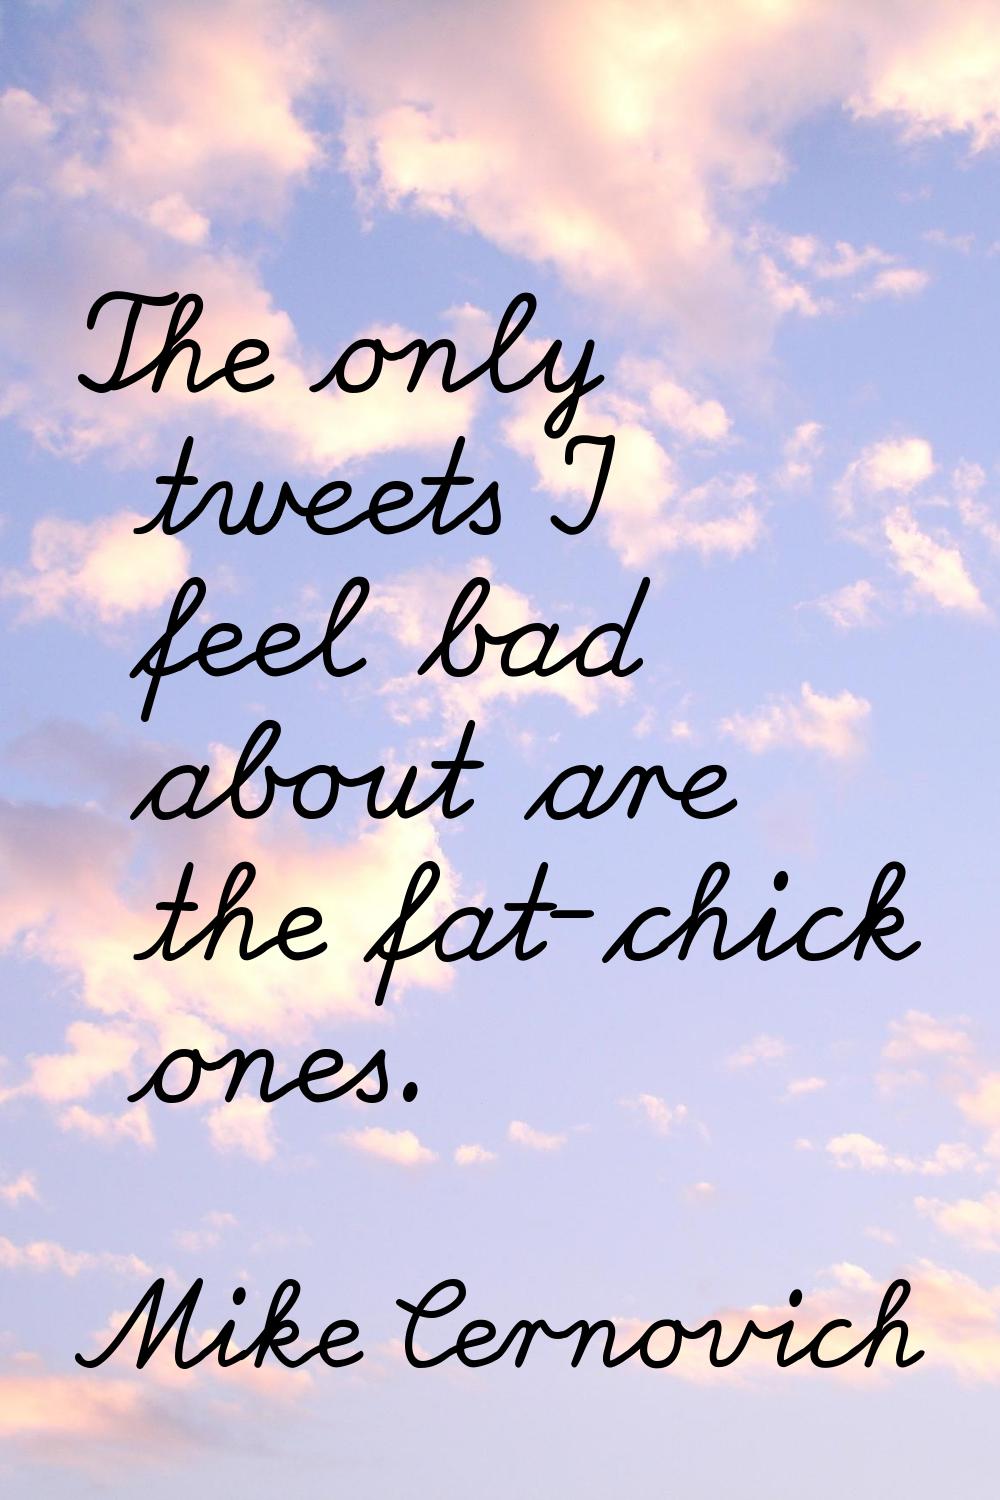 The only tweets I feel bad about are the fat-chick ones.